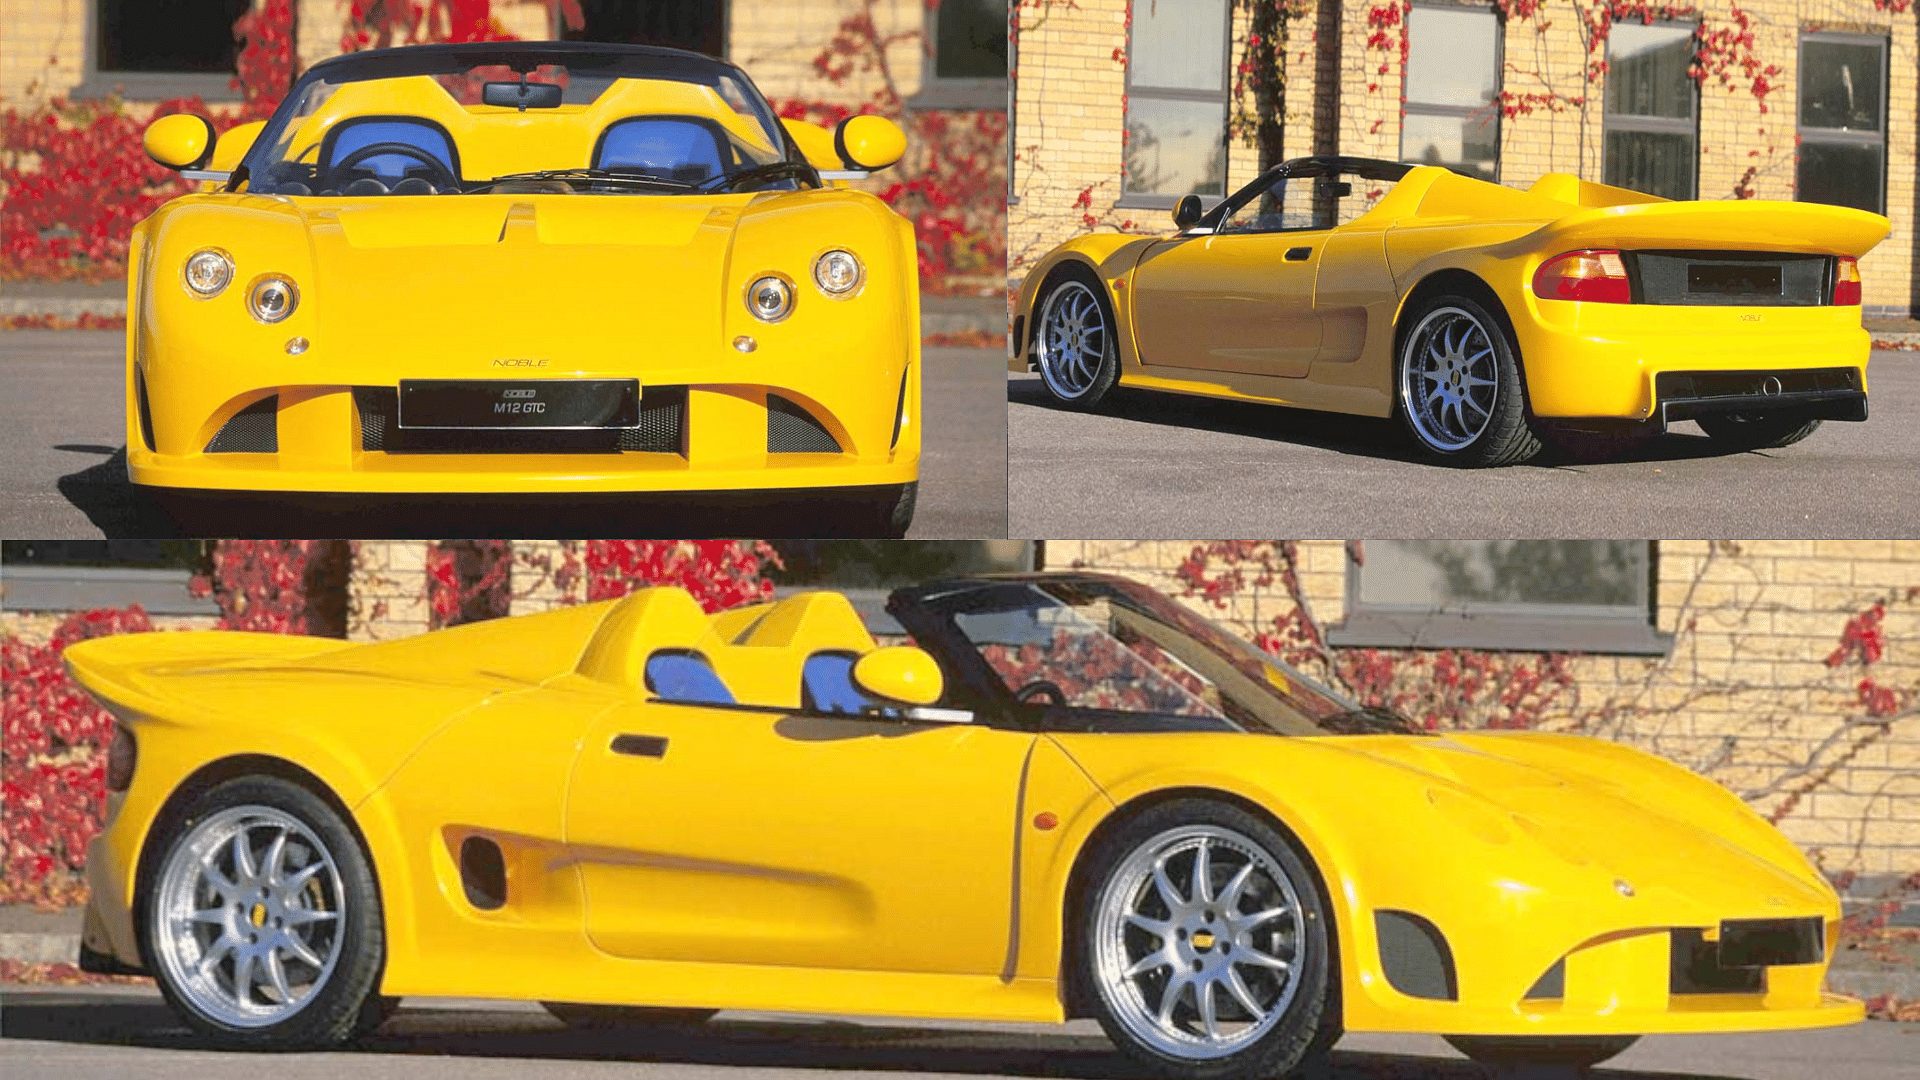 Noble M12 GTC Convertible in Yellow - front, side, rear view